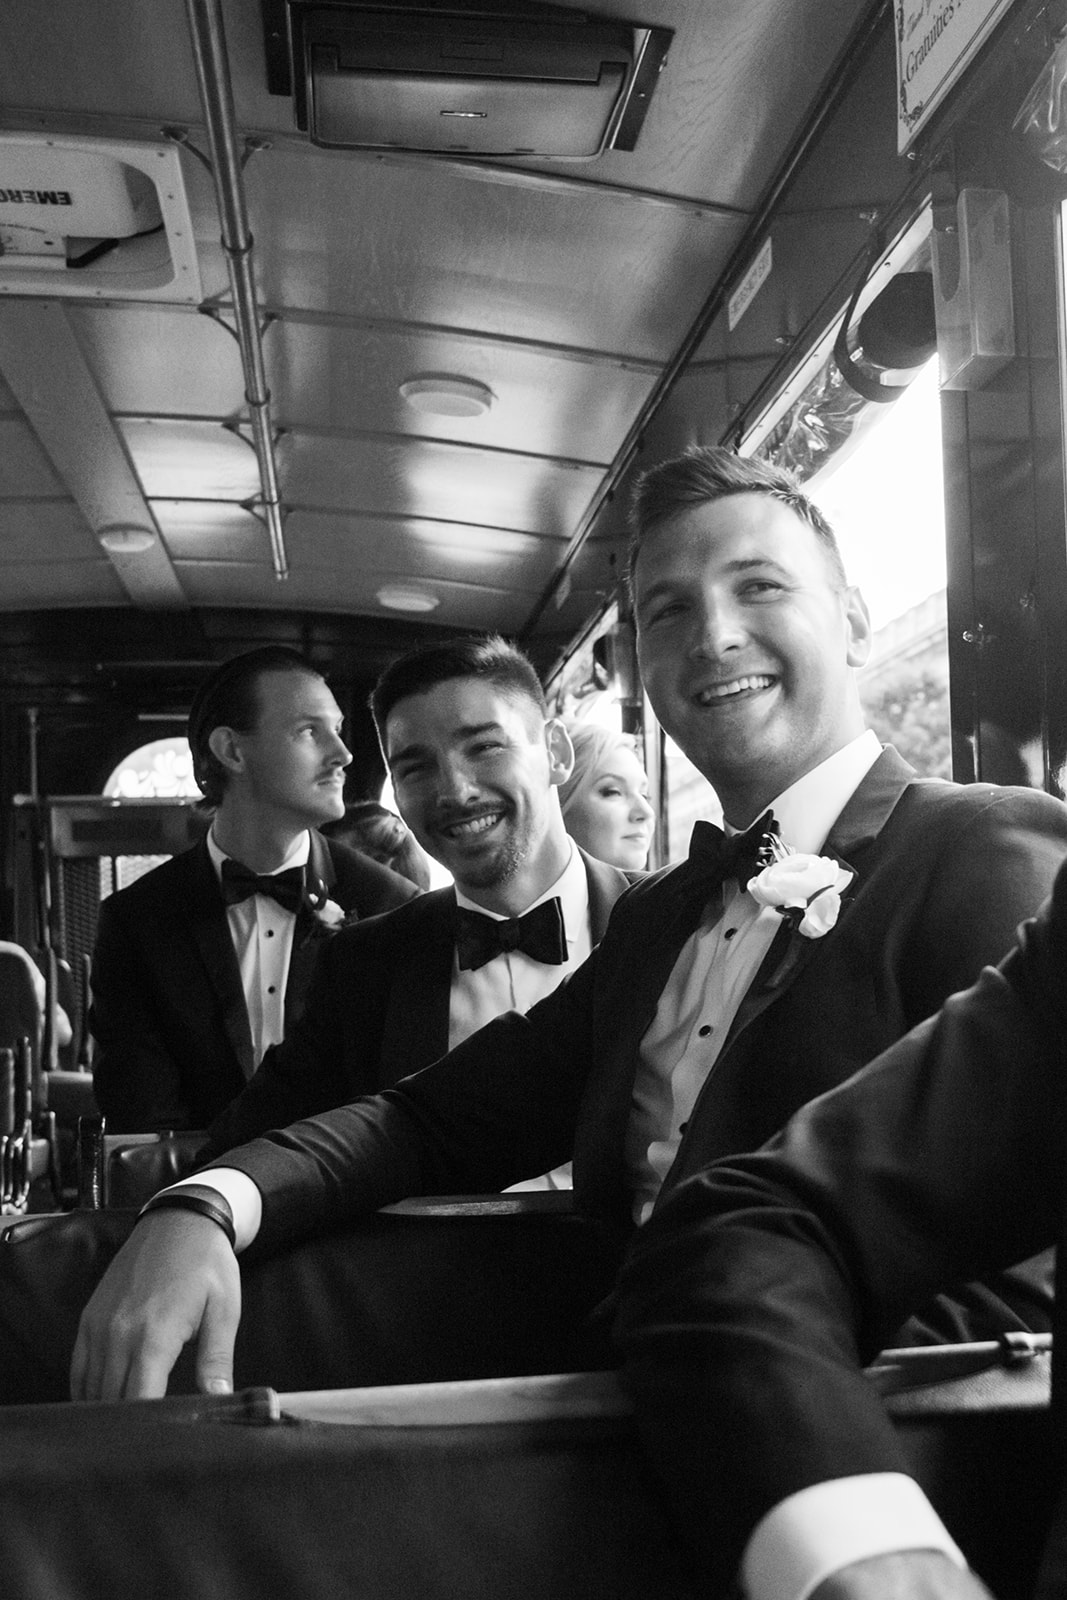 Groom rides trolly to wedding ceremony at Georgetown University